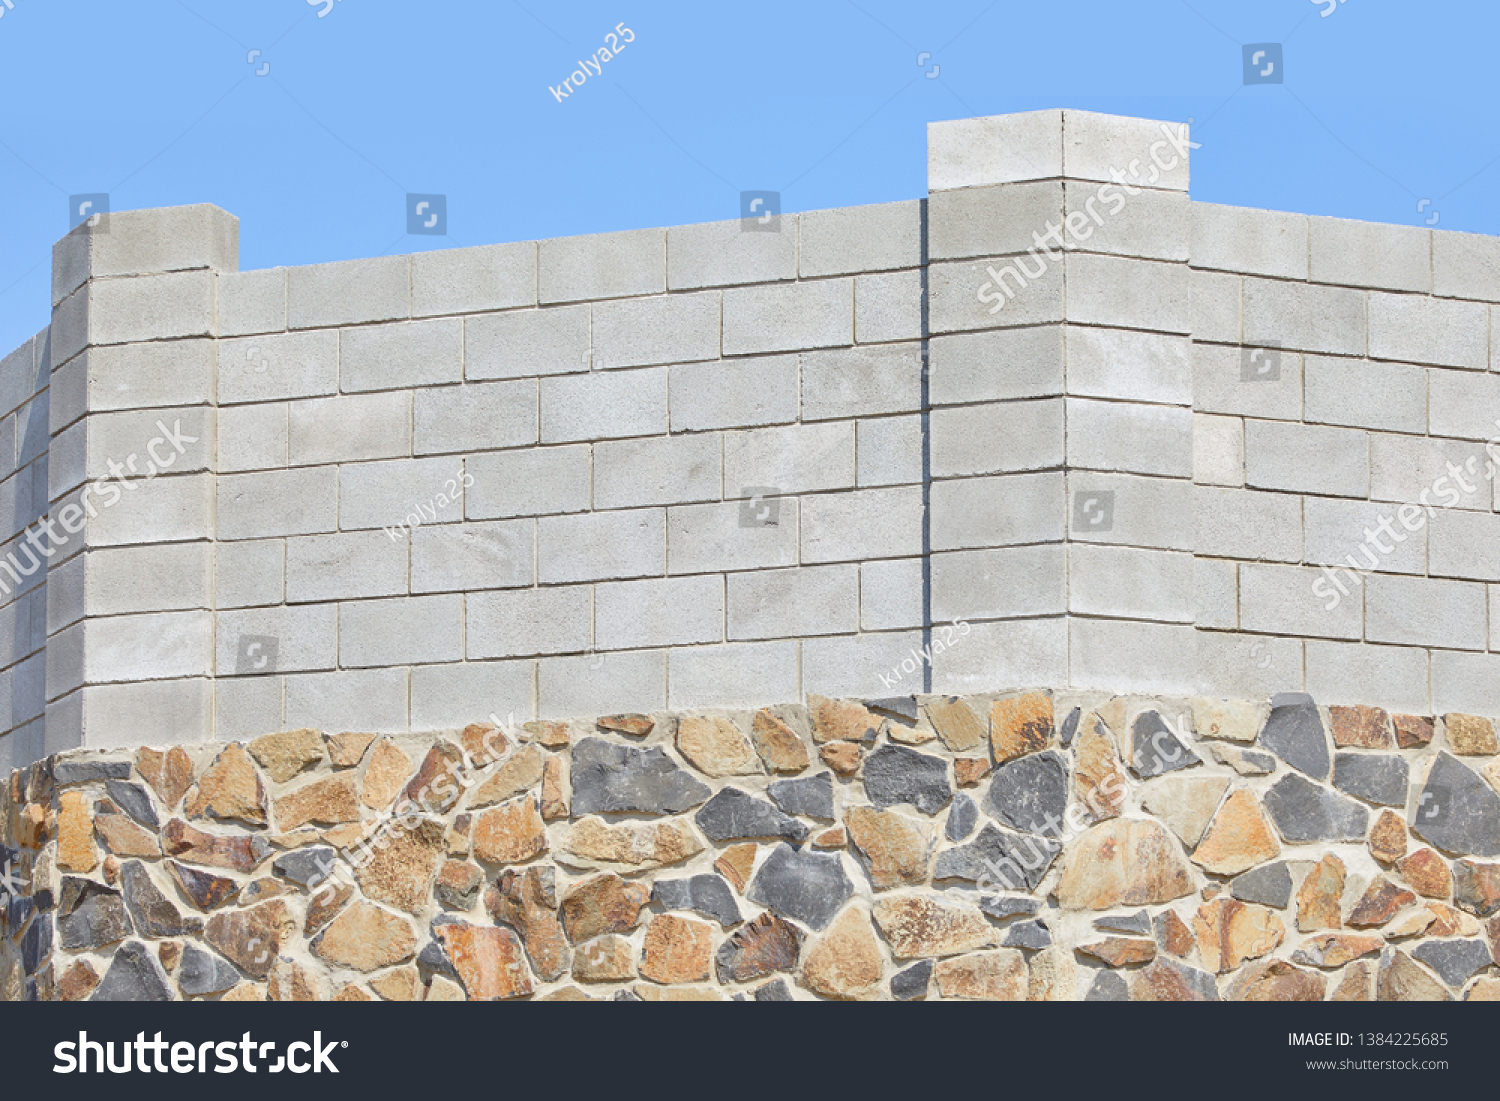 Concrete block bricks in stack for wall construction. Concrete block, cinder blocks, breeze blocks, hollow blocks, Besser blocks or Besser bricks wall background, brick texture #1384225685